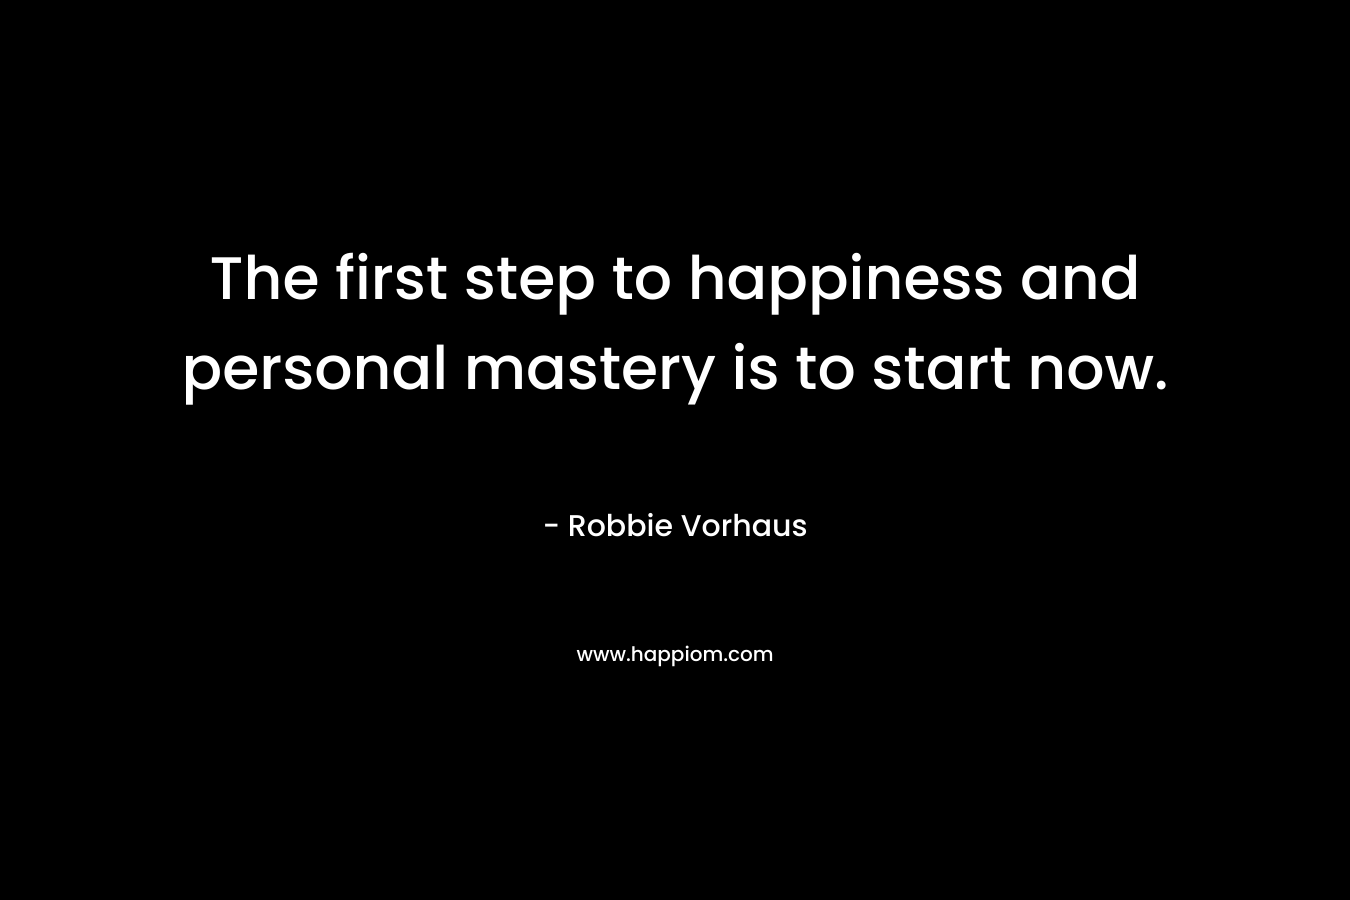 The first step to happiness and personal mastery is to start now. – Robbie Vorhaus